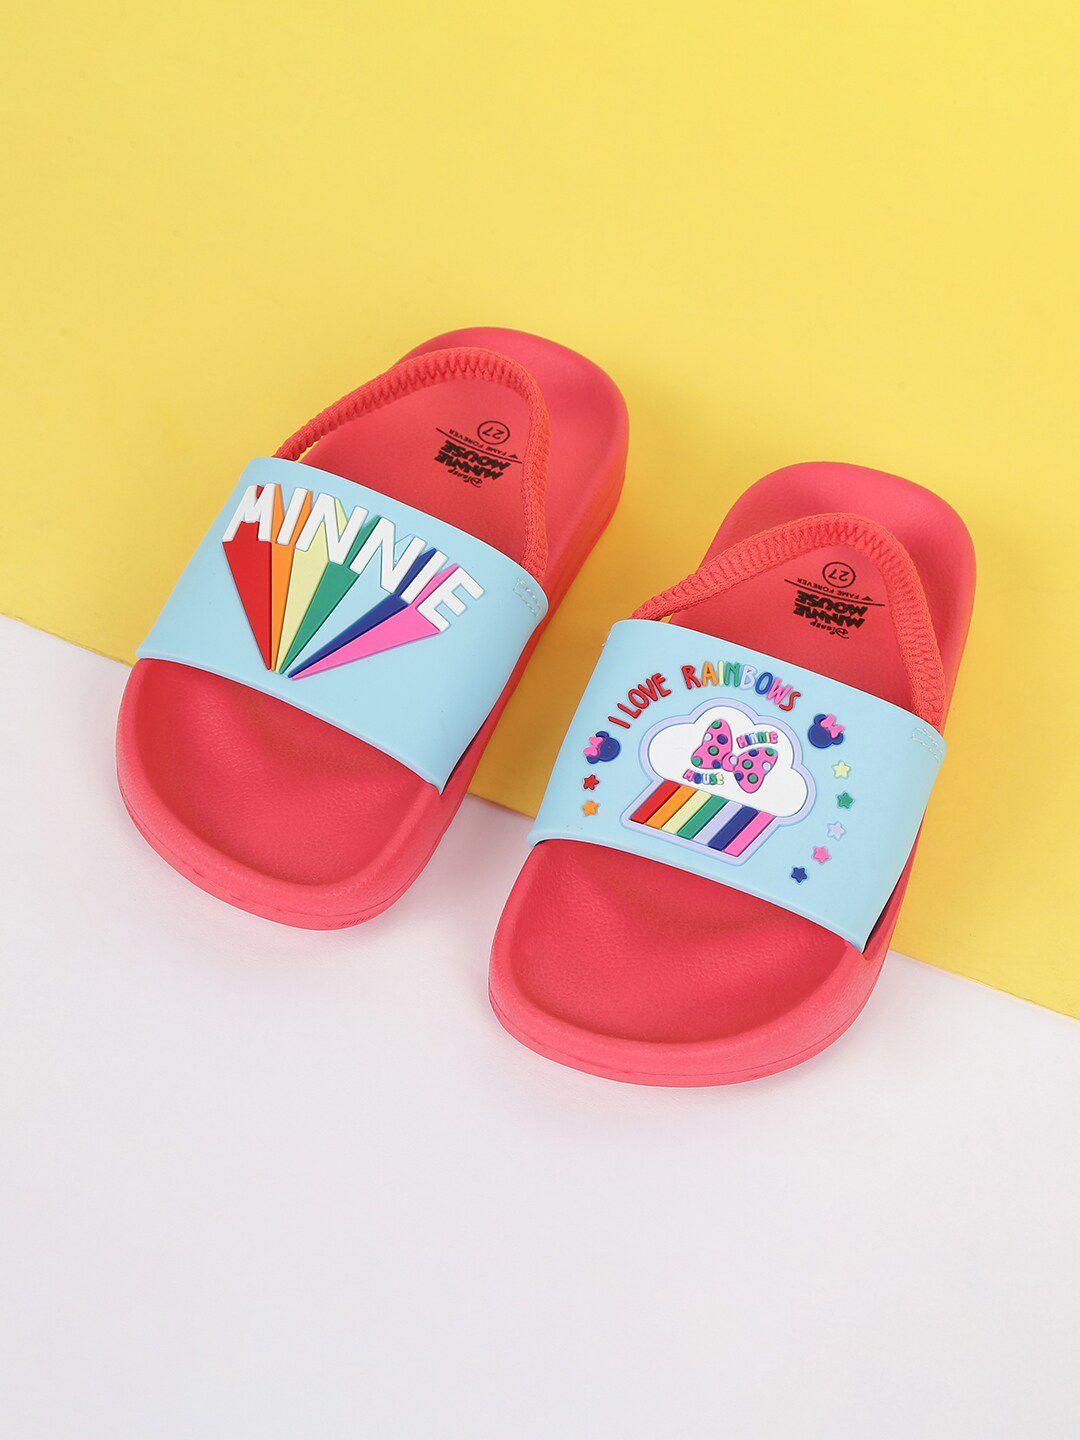 fame forever by lifestyle girls blue & red printed rubber sliders